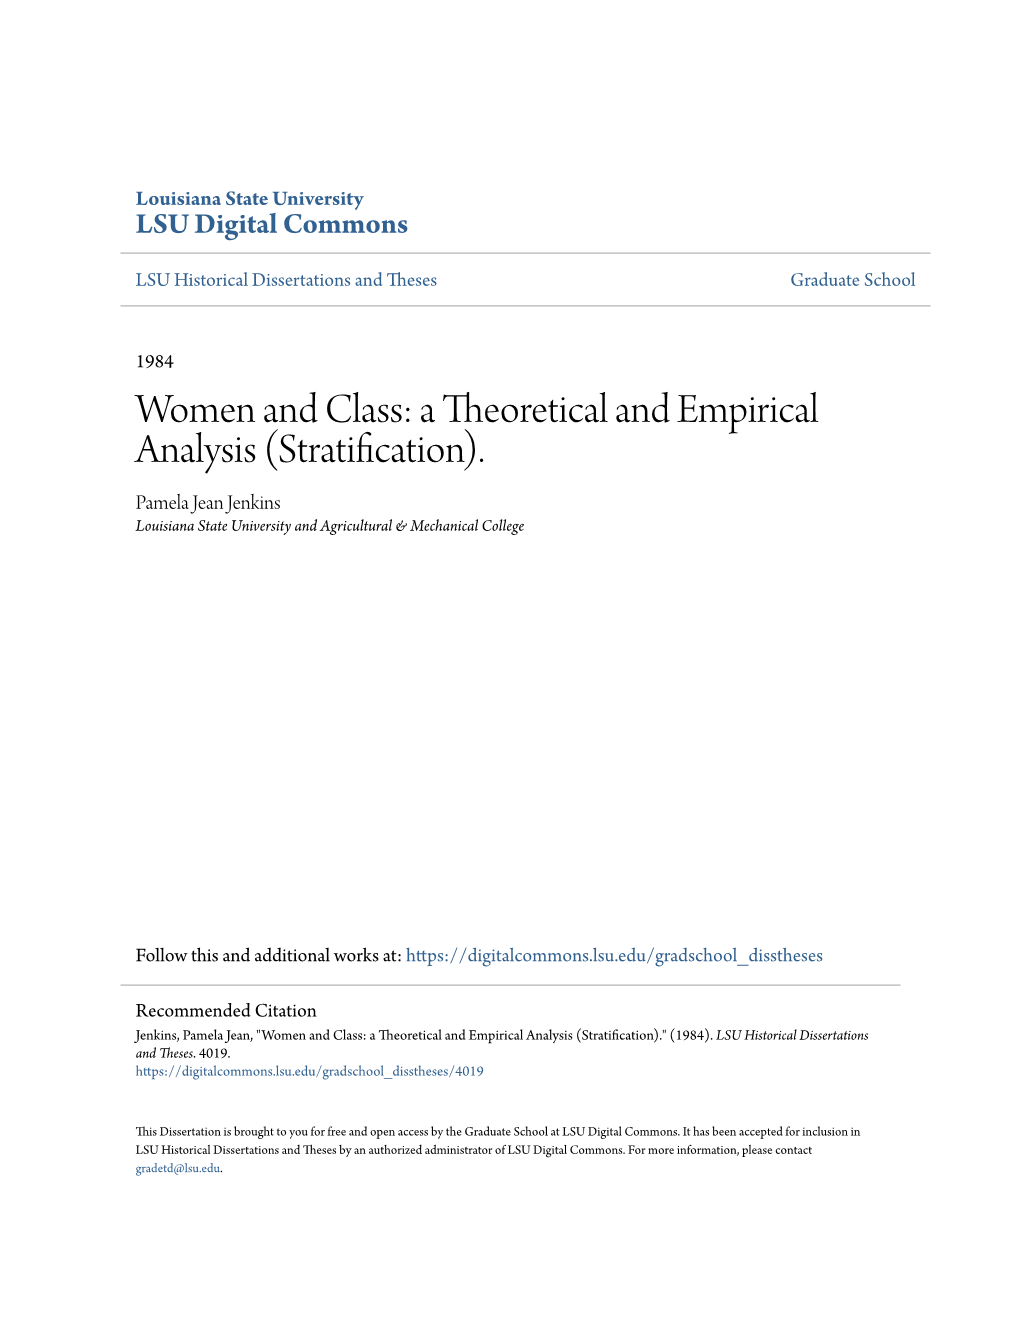 Women and Class: a Theoretical and Empirical Analysis (Stratification)